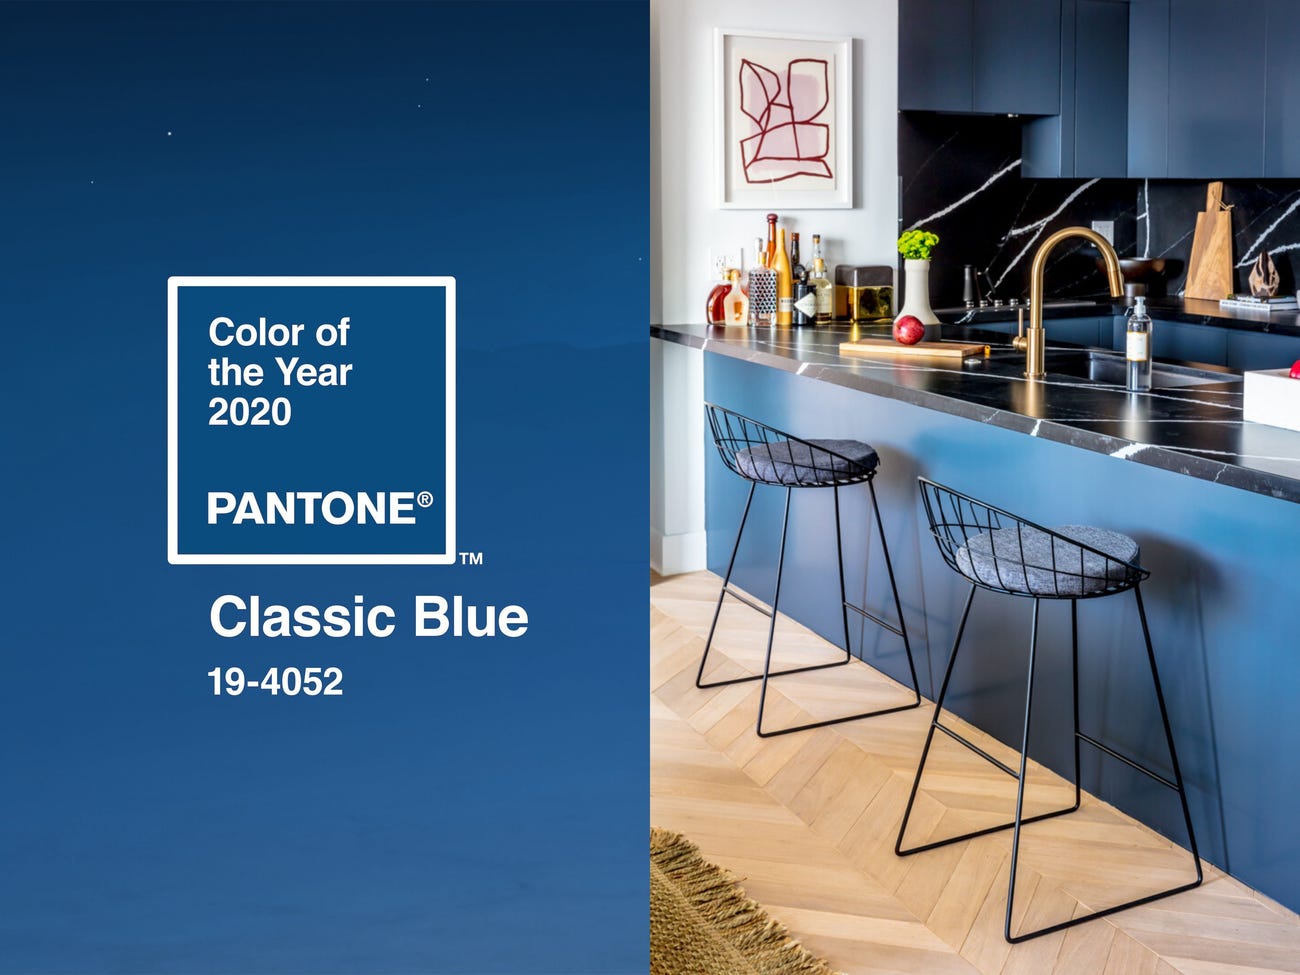 Image Source: Pantone; Courtesy of Eron Rauch Photography - Pantone Colour of the year 2020